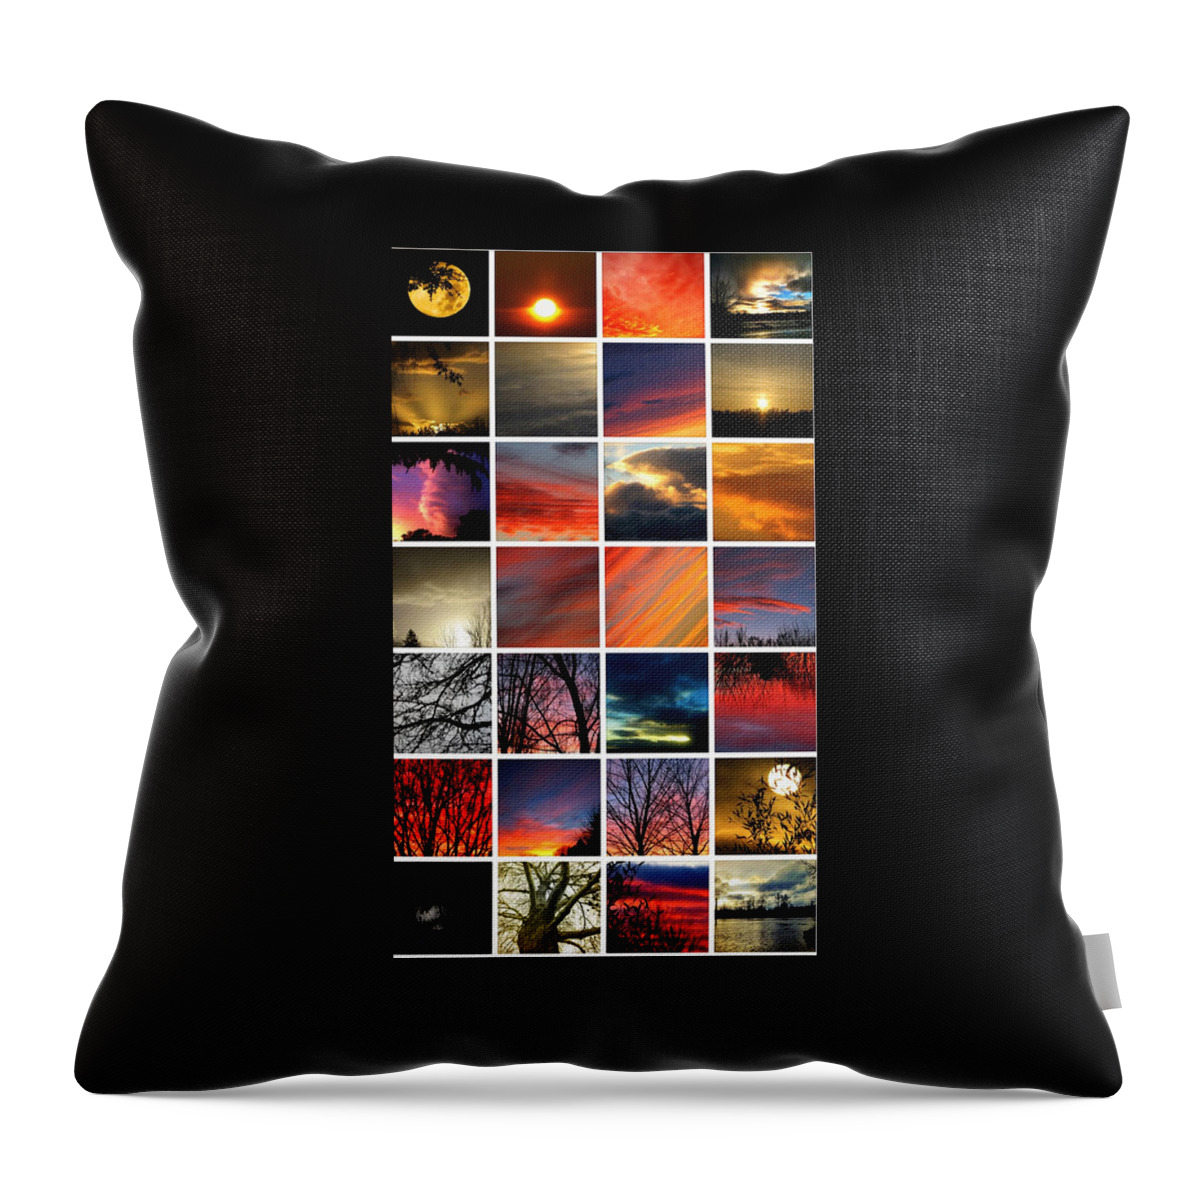 Sun Throw Pillow featuring the photograph Chris's Greatest Hits by Chris Dunn